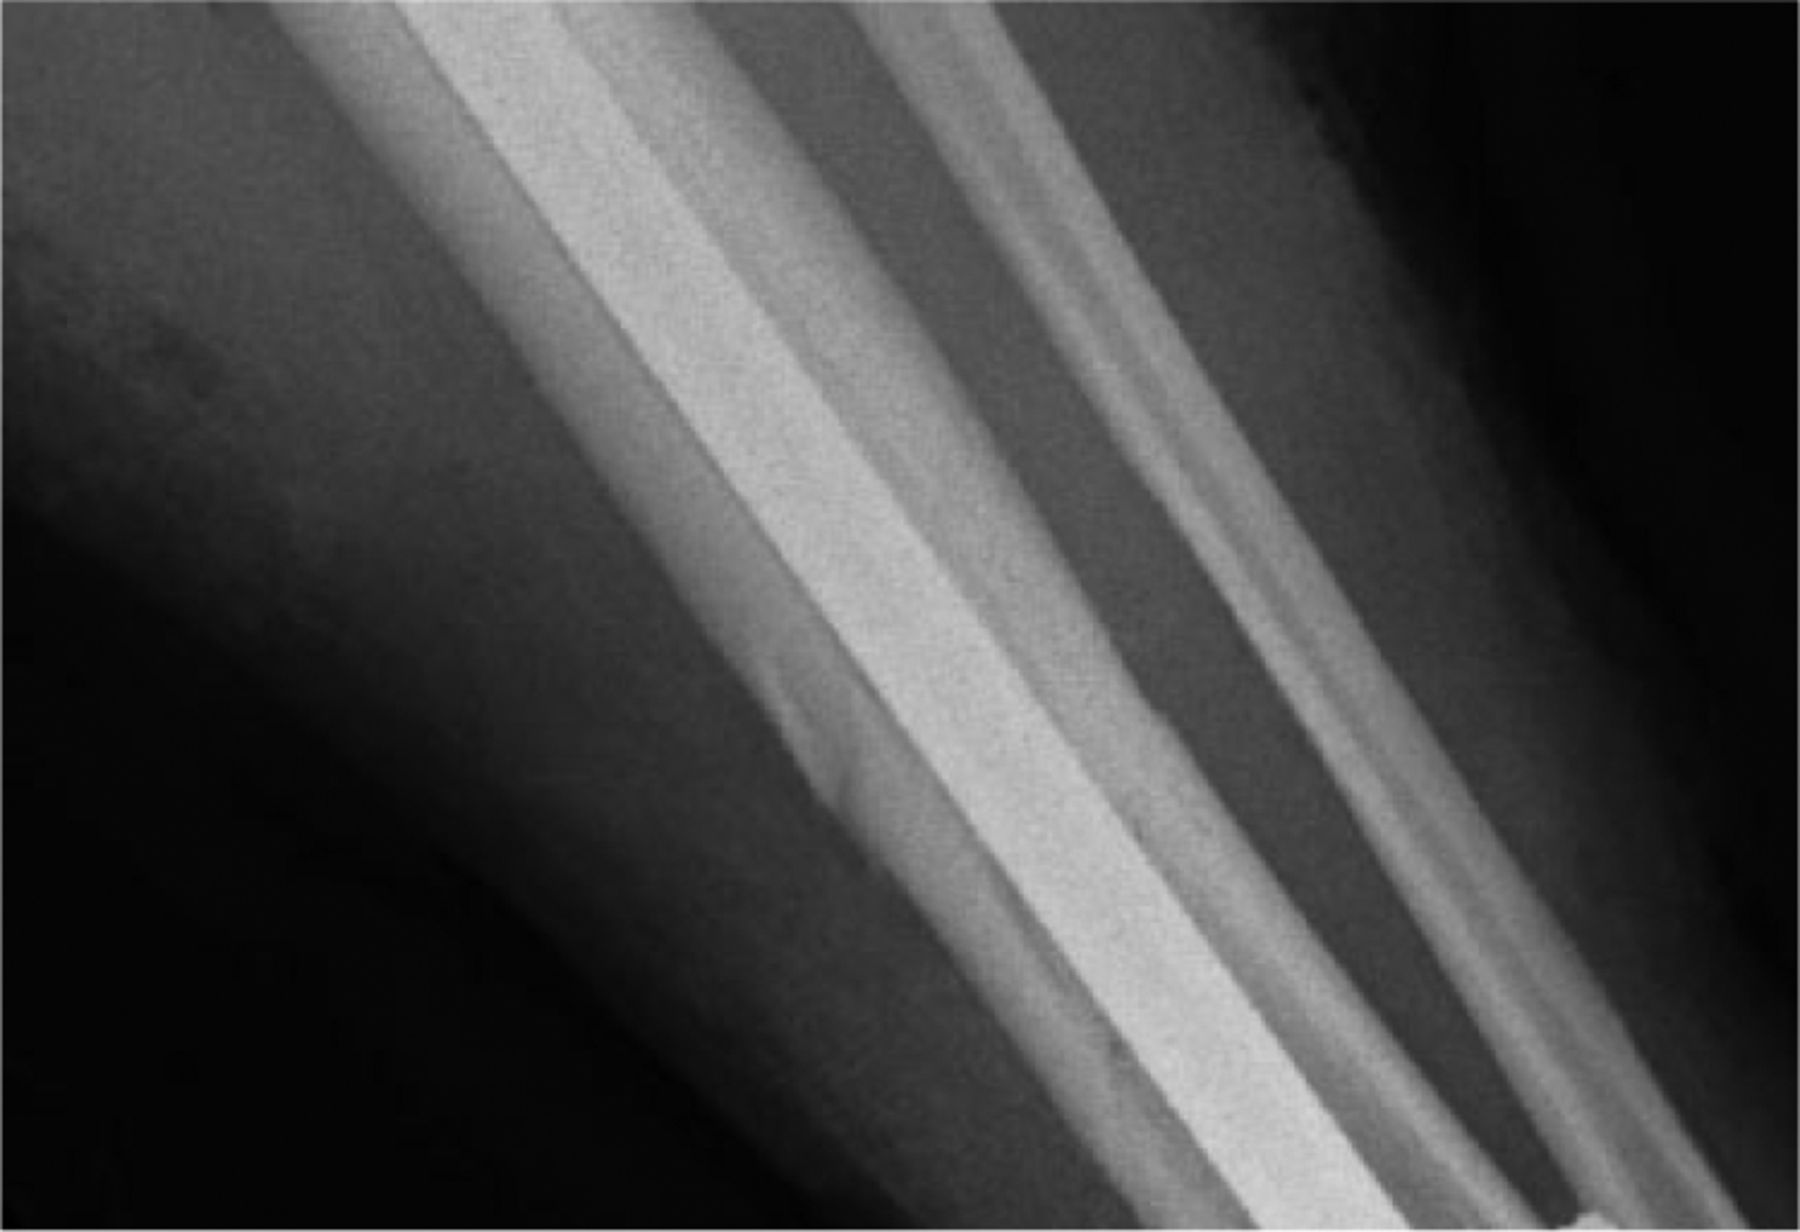 Fig. 5 
          Anteroposterior radiograph showing the tibia and fibula. It was taken immediately after operation and shows barely visible fracture lines, but no callus.
        